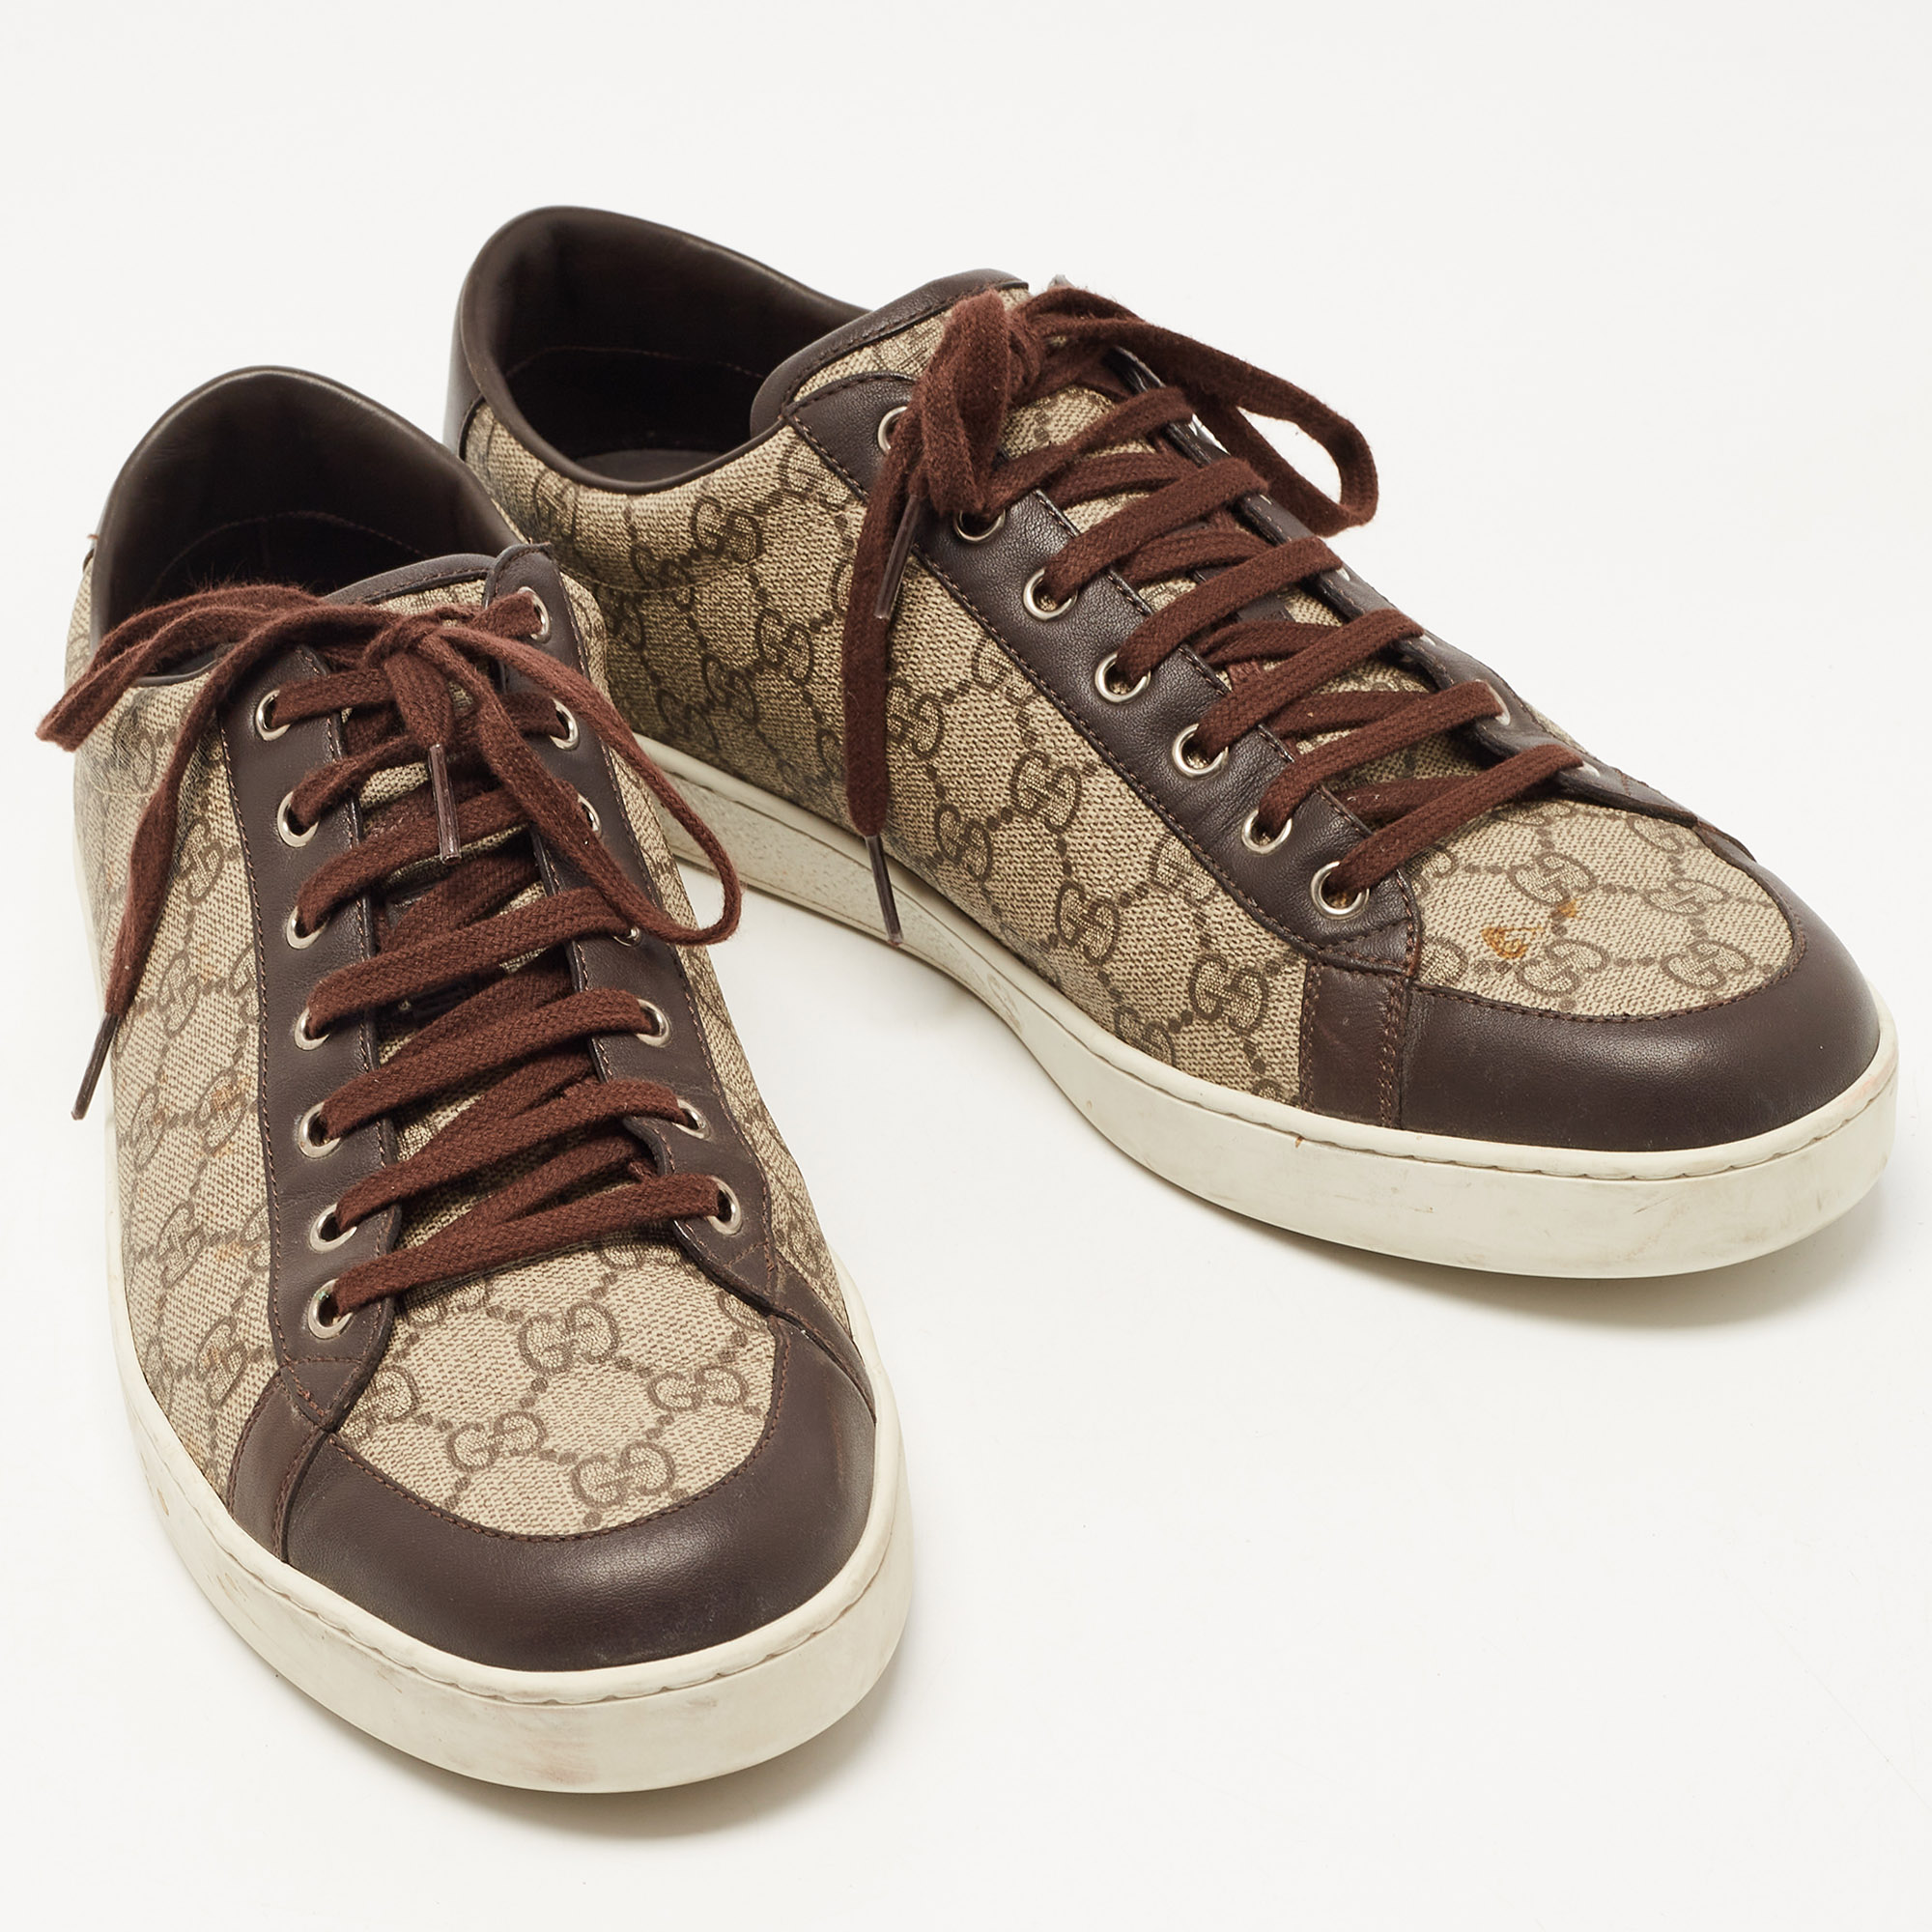 Gucci Beige/Brown GG Supreme Canvas And Leather Low Top Sneakers Size 46